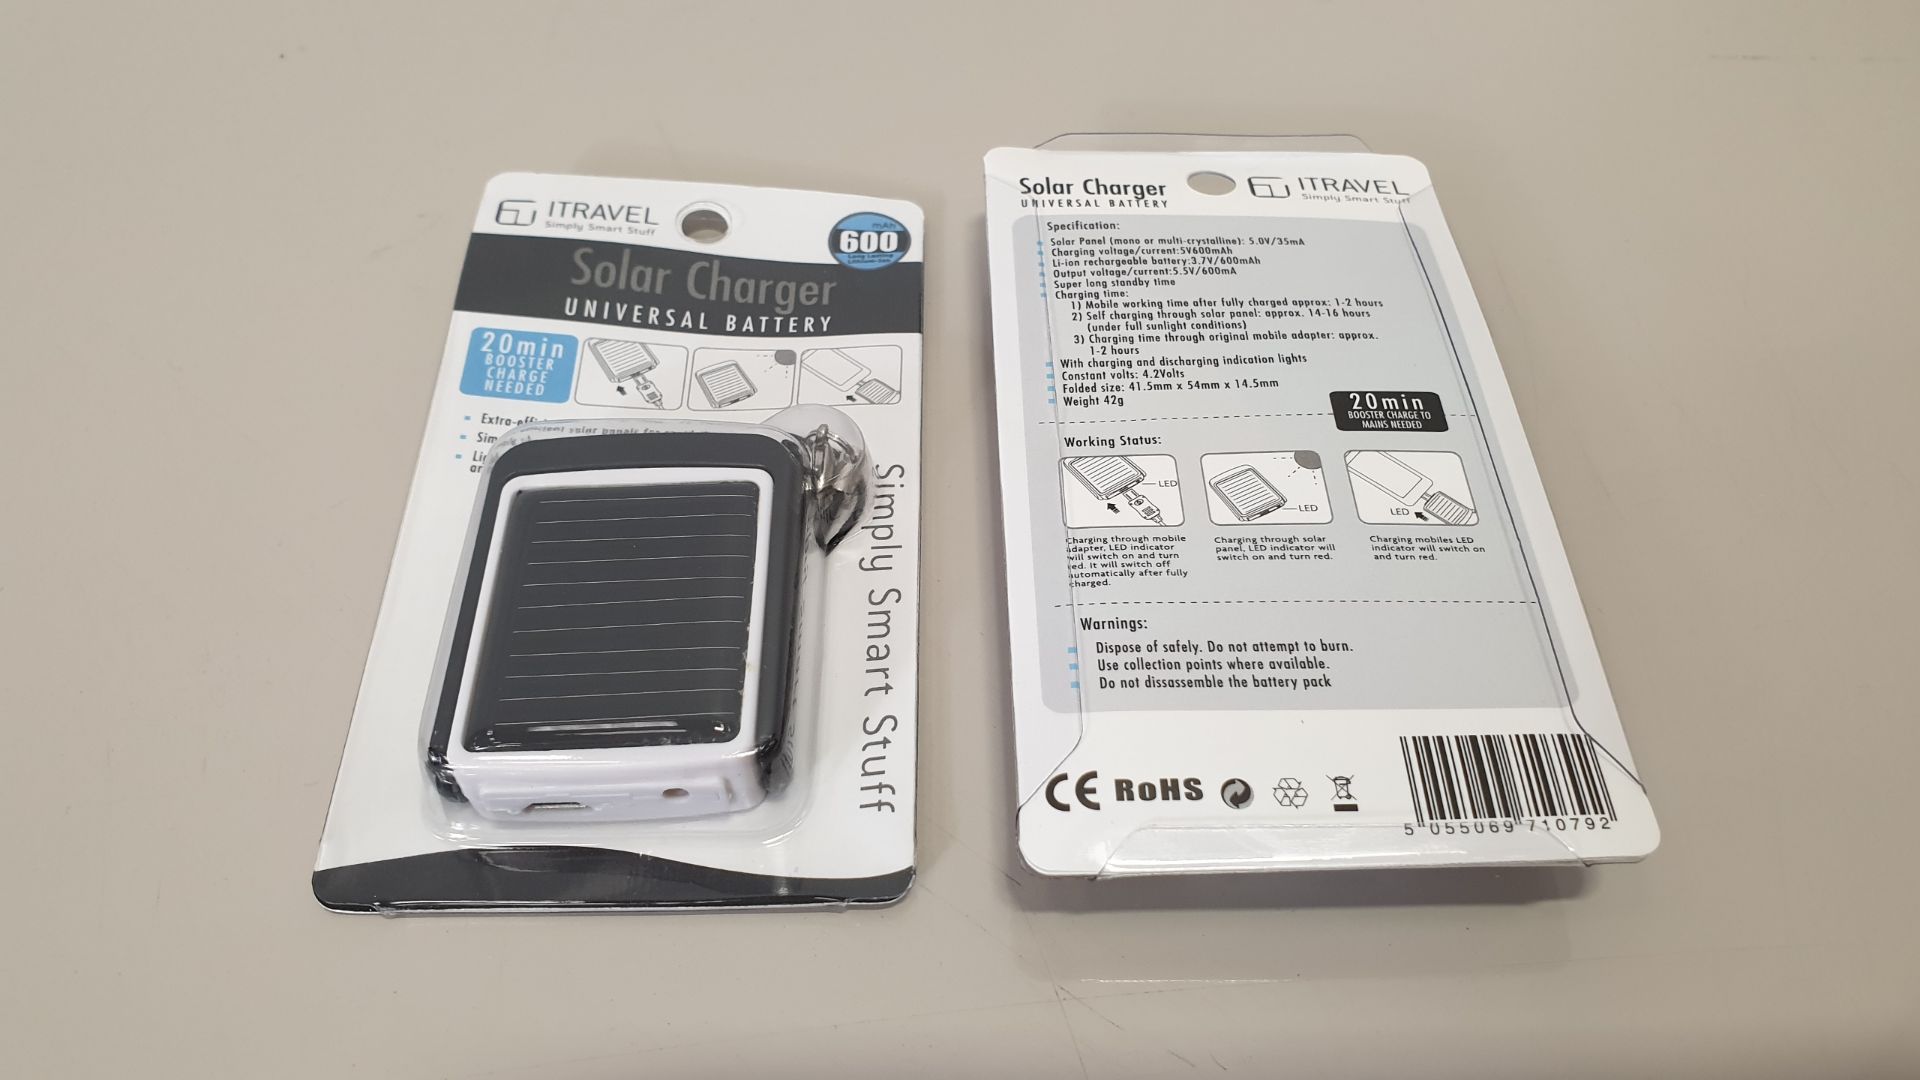 336 X iTRAVEL SOLAR CHARGER UNIVERSAL BATTERY (LET101) - IN 2 CARTONS